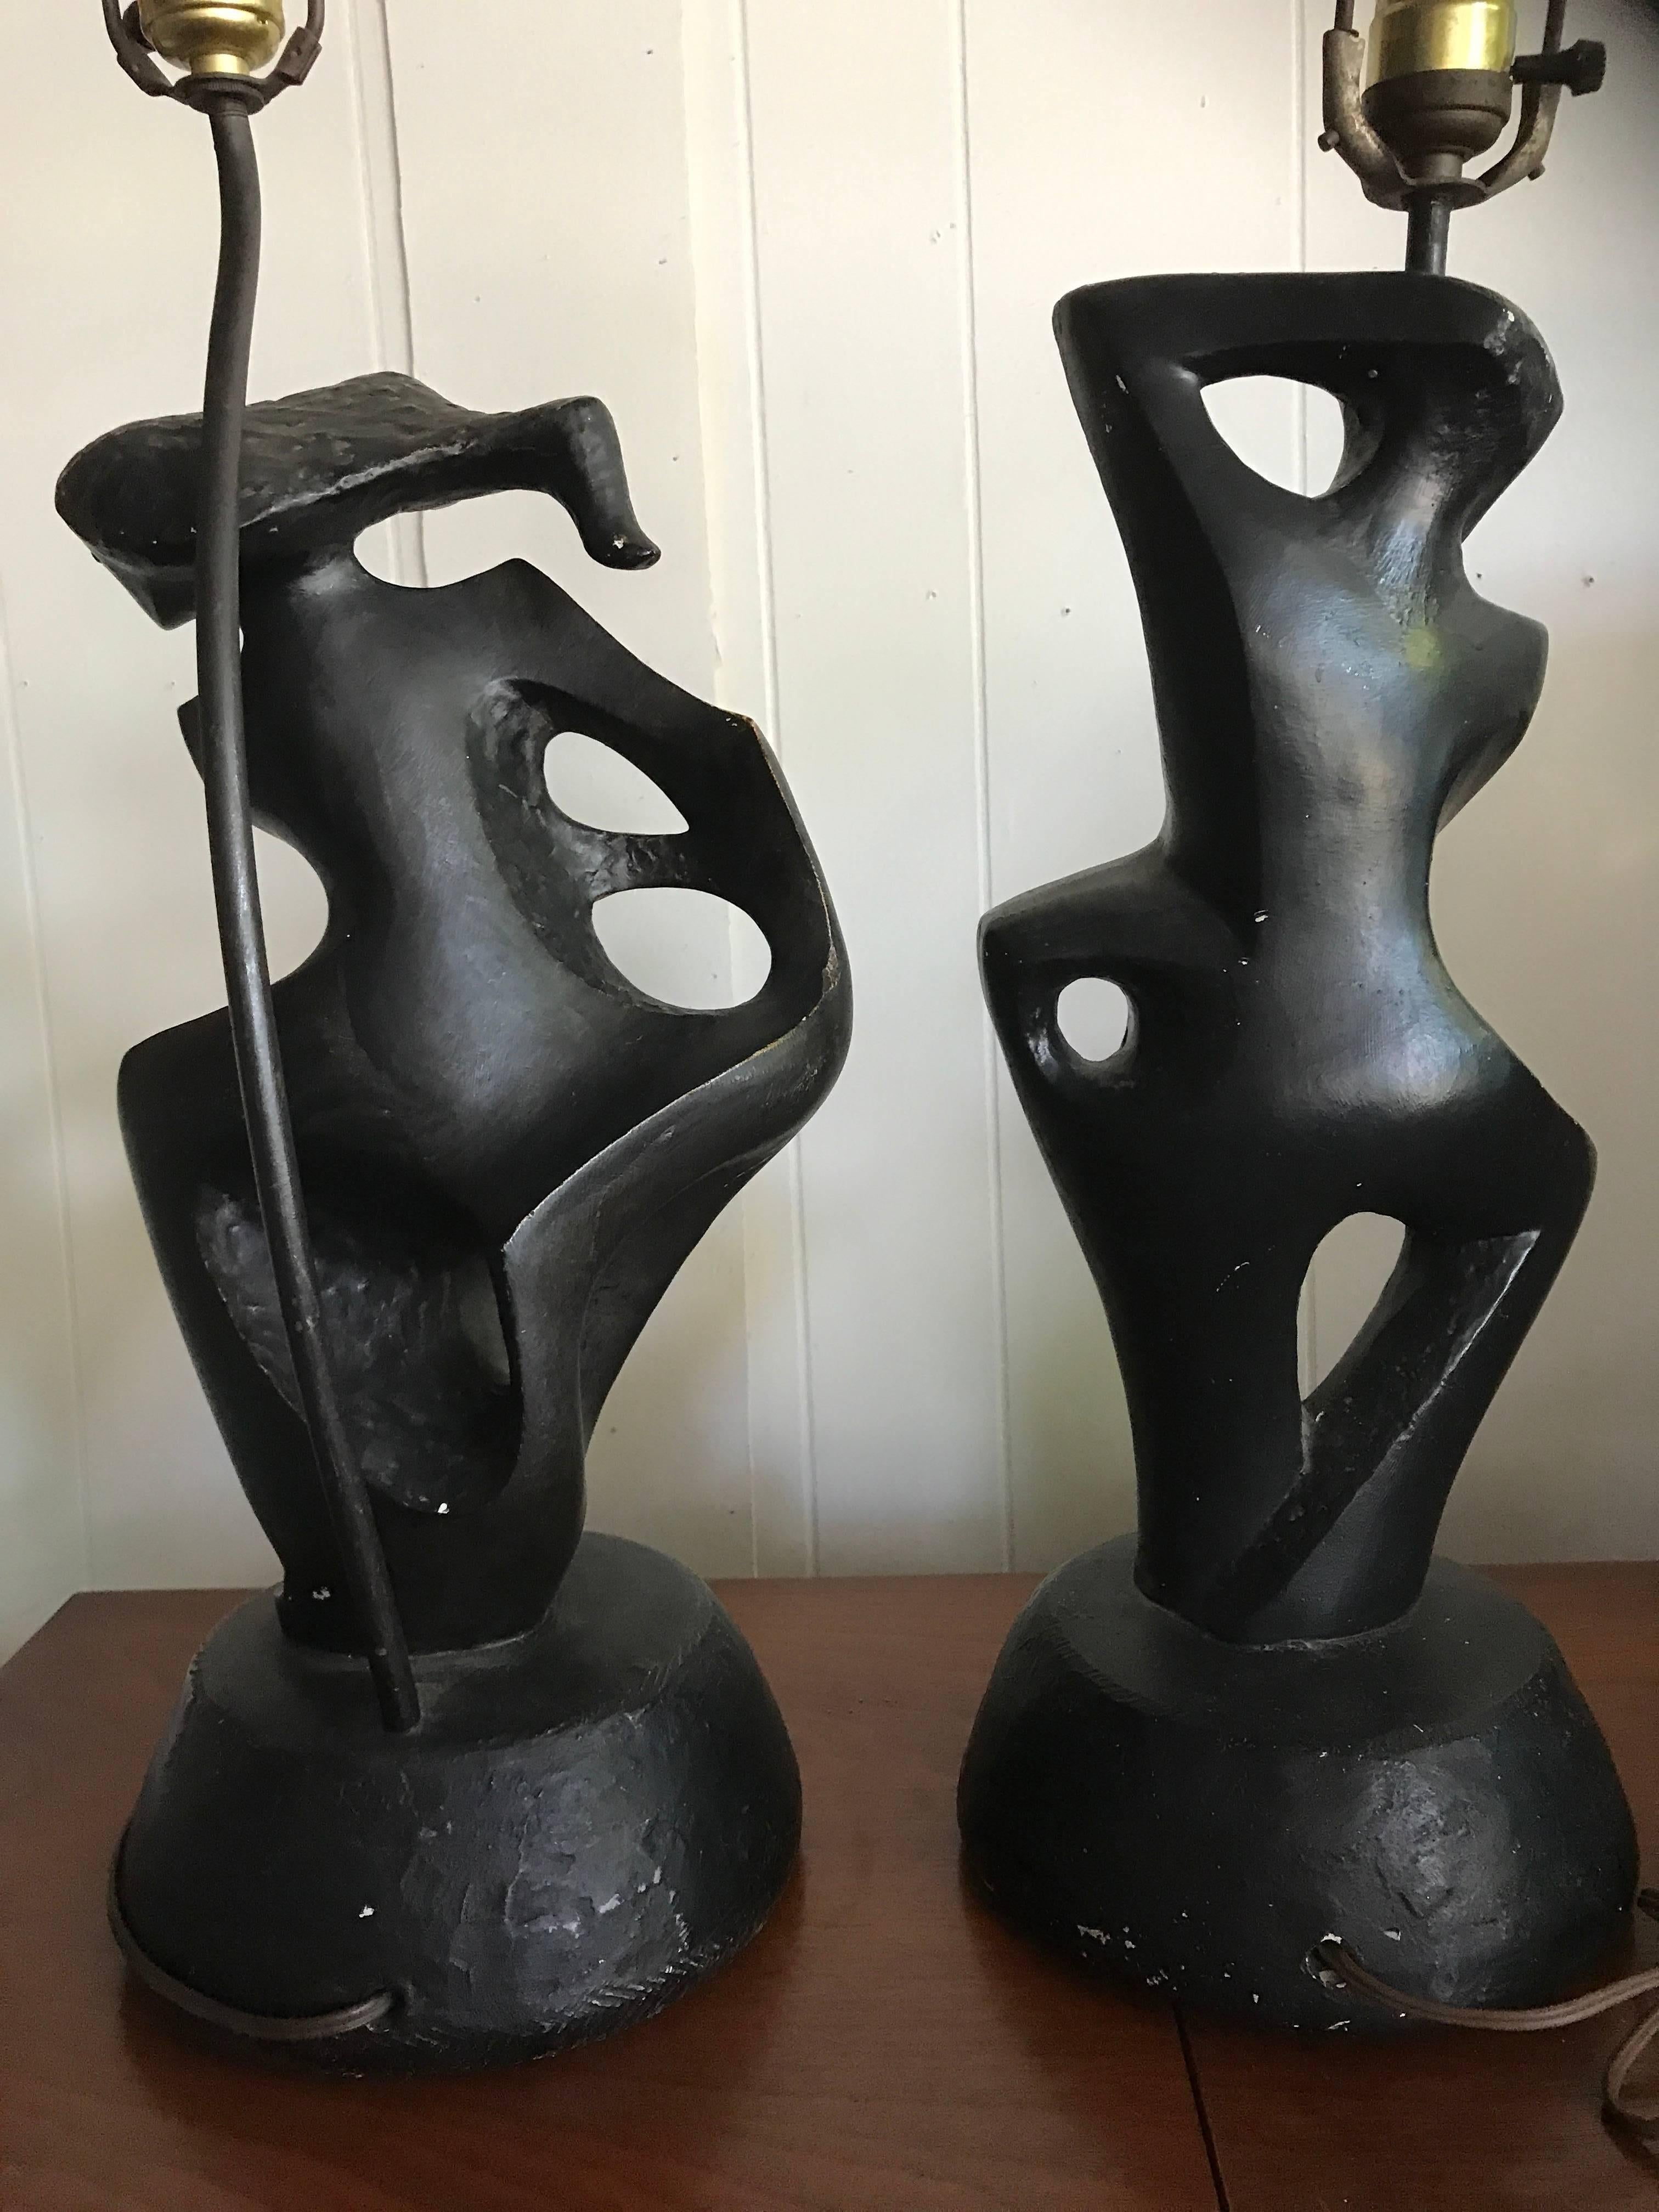  Spectacular Pair of Marianna von Allesch Cubism Male Female Lamp Rima In Good Condition For Sale In Pemberton, NJ